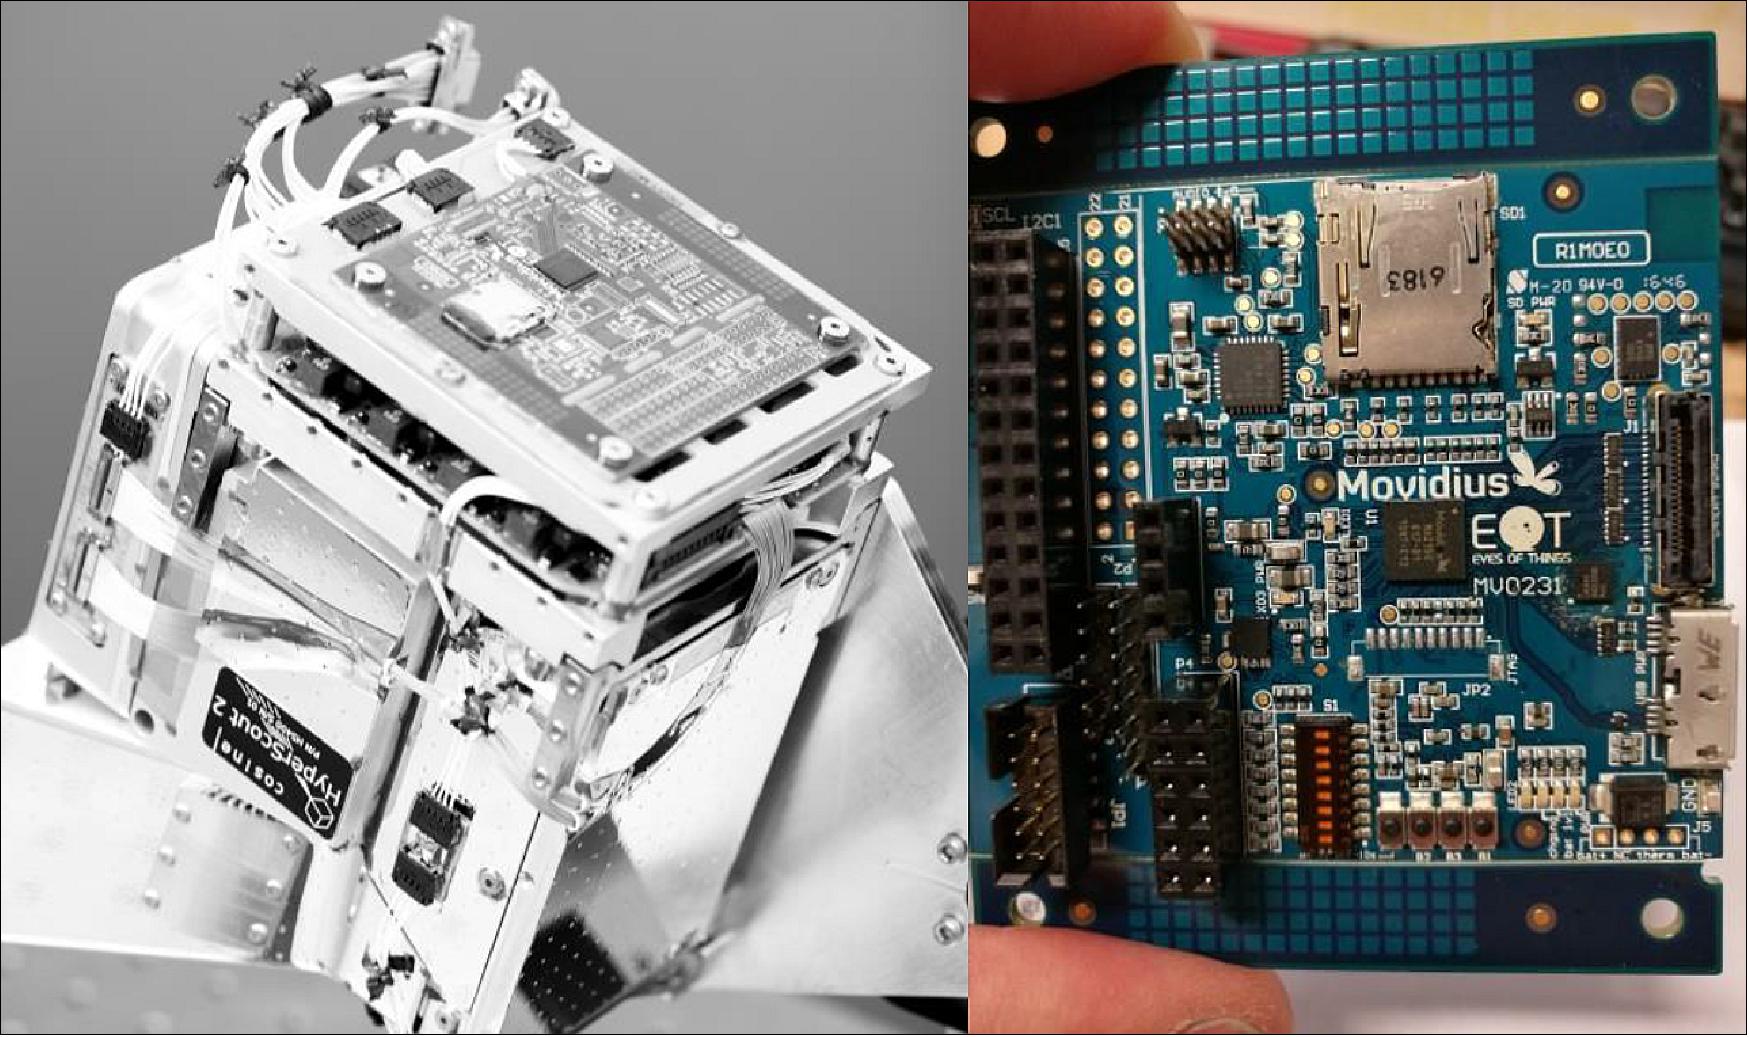 Figure 5: Right: Intel's Movidius Myriad 2 board, Left: as integrated on the top of the HyperScout-2 electronics stack (image credit: cosine Remote Sensing, ESA/ESTEC).